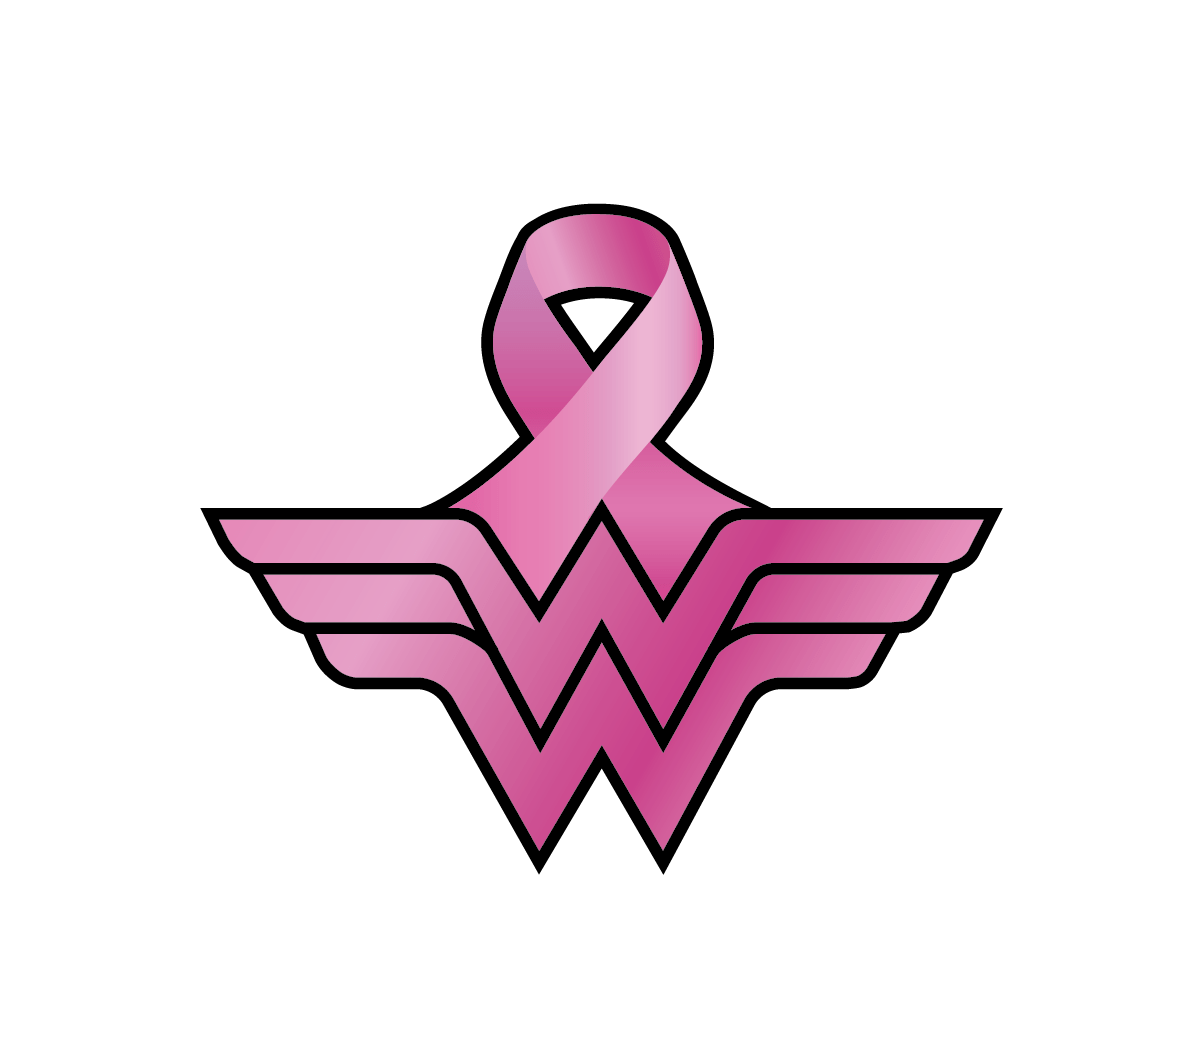 Superhero Breast Cancer Ribbon integrated into a stylized letter 'W' inspired by Wonder Woman, set against a green background.